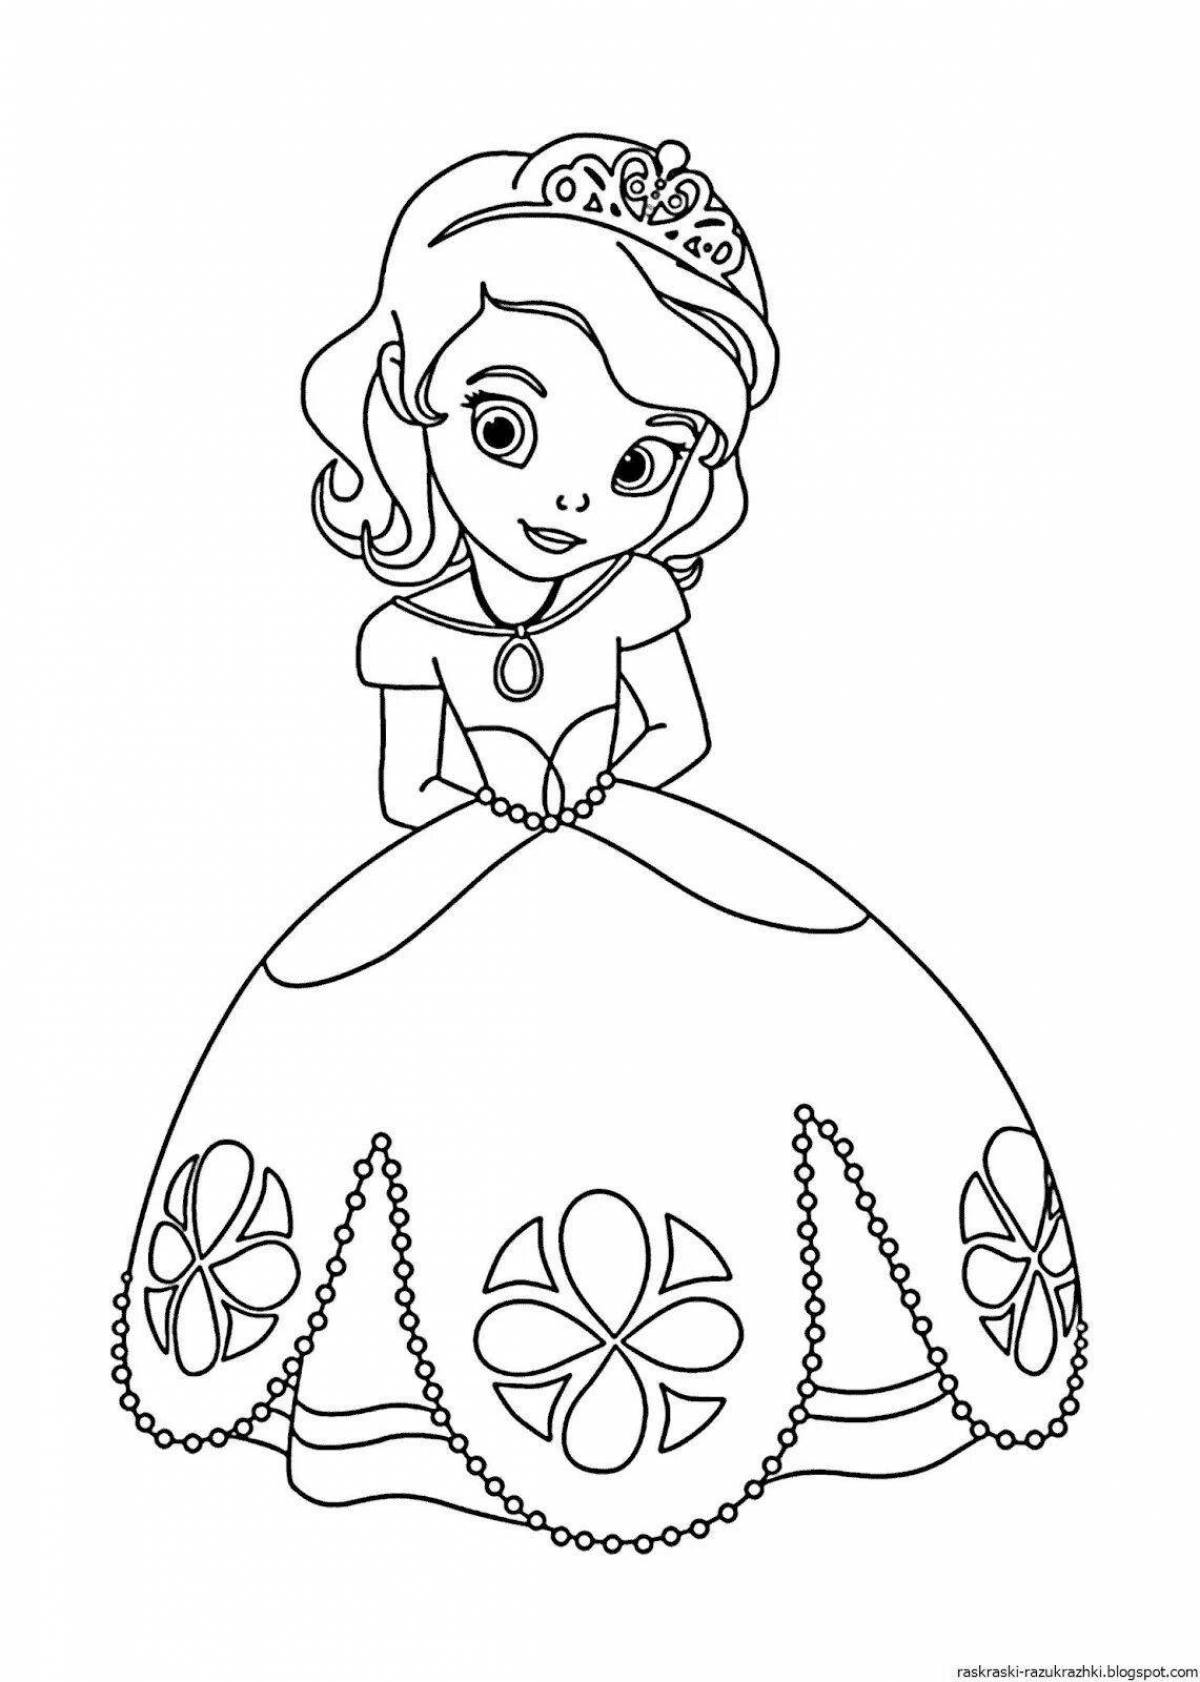 Fairytale coloring book for girls princesses 3-4 years old